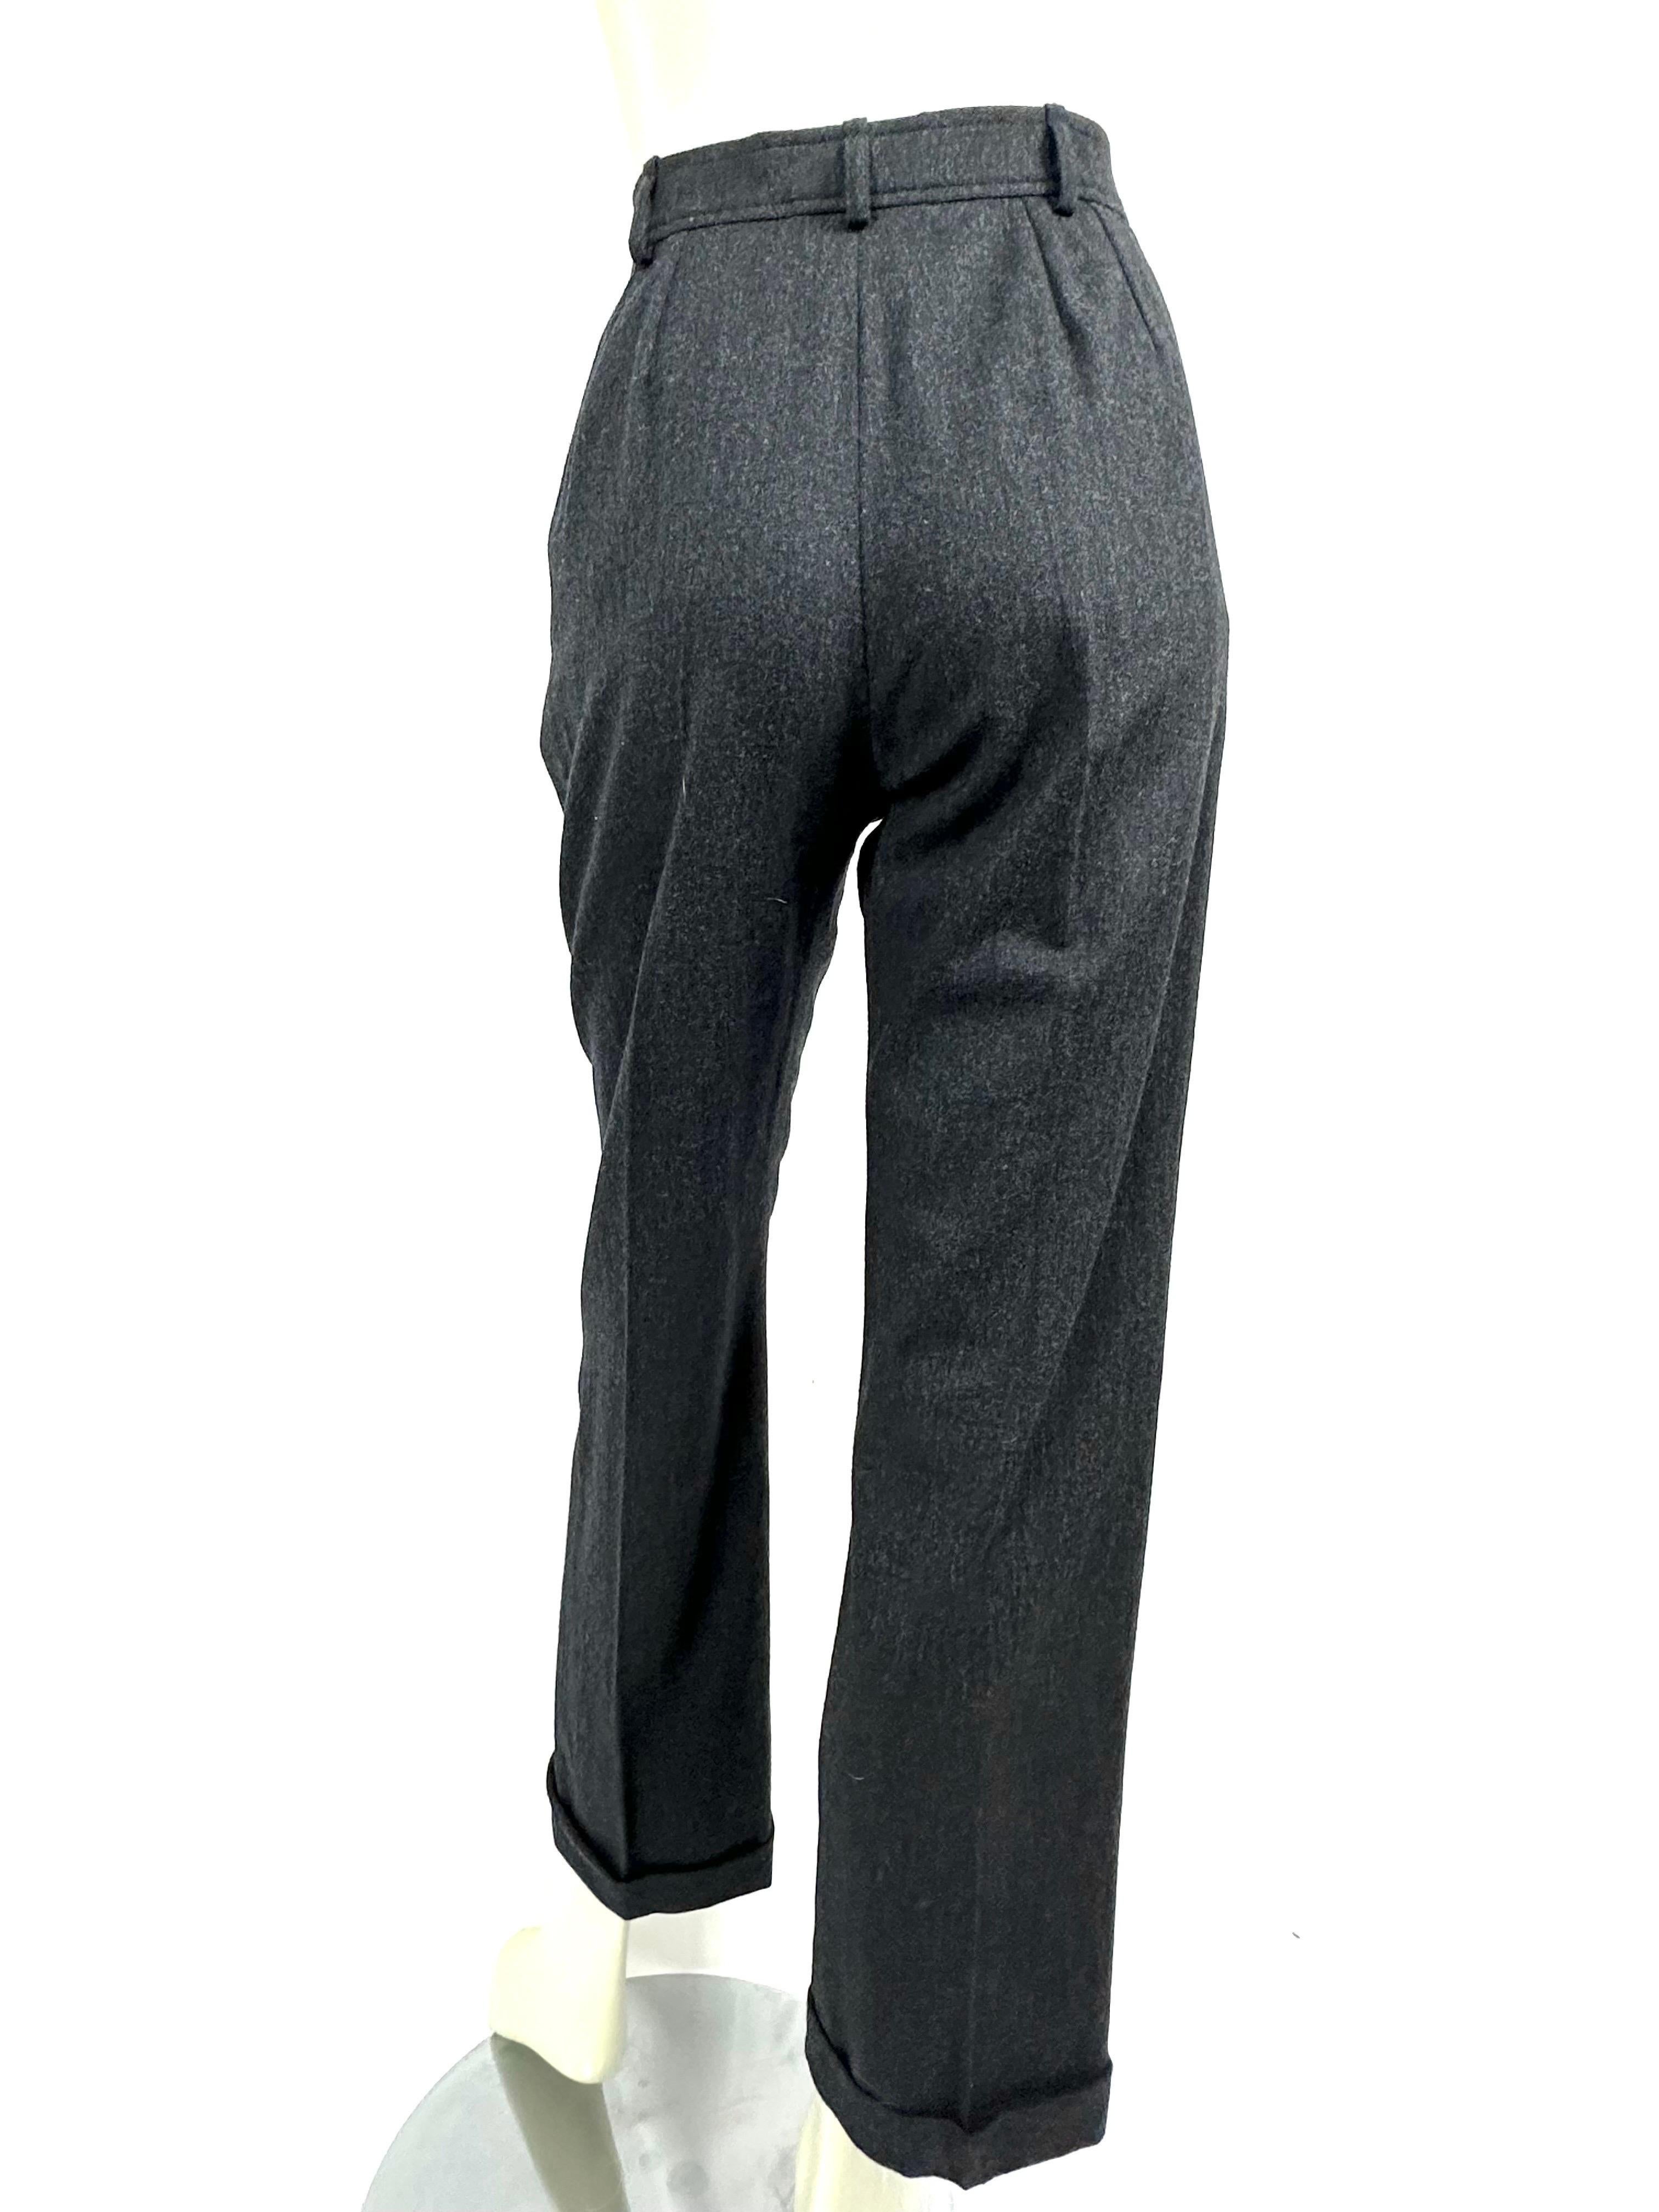 Ysl vintage anthracite gray wool trousers from the 1990s 4